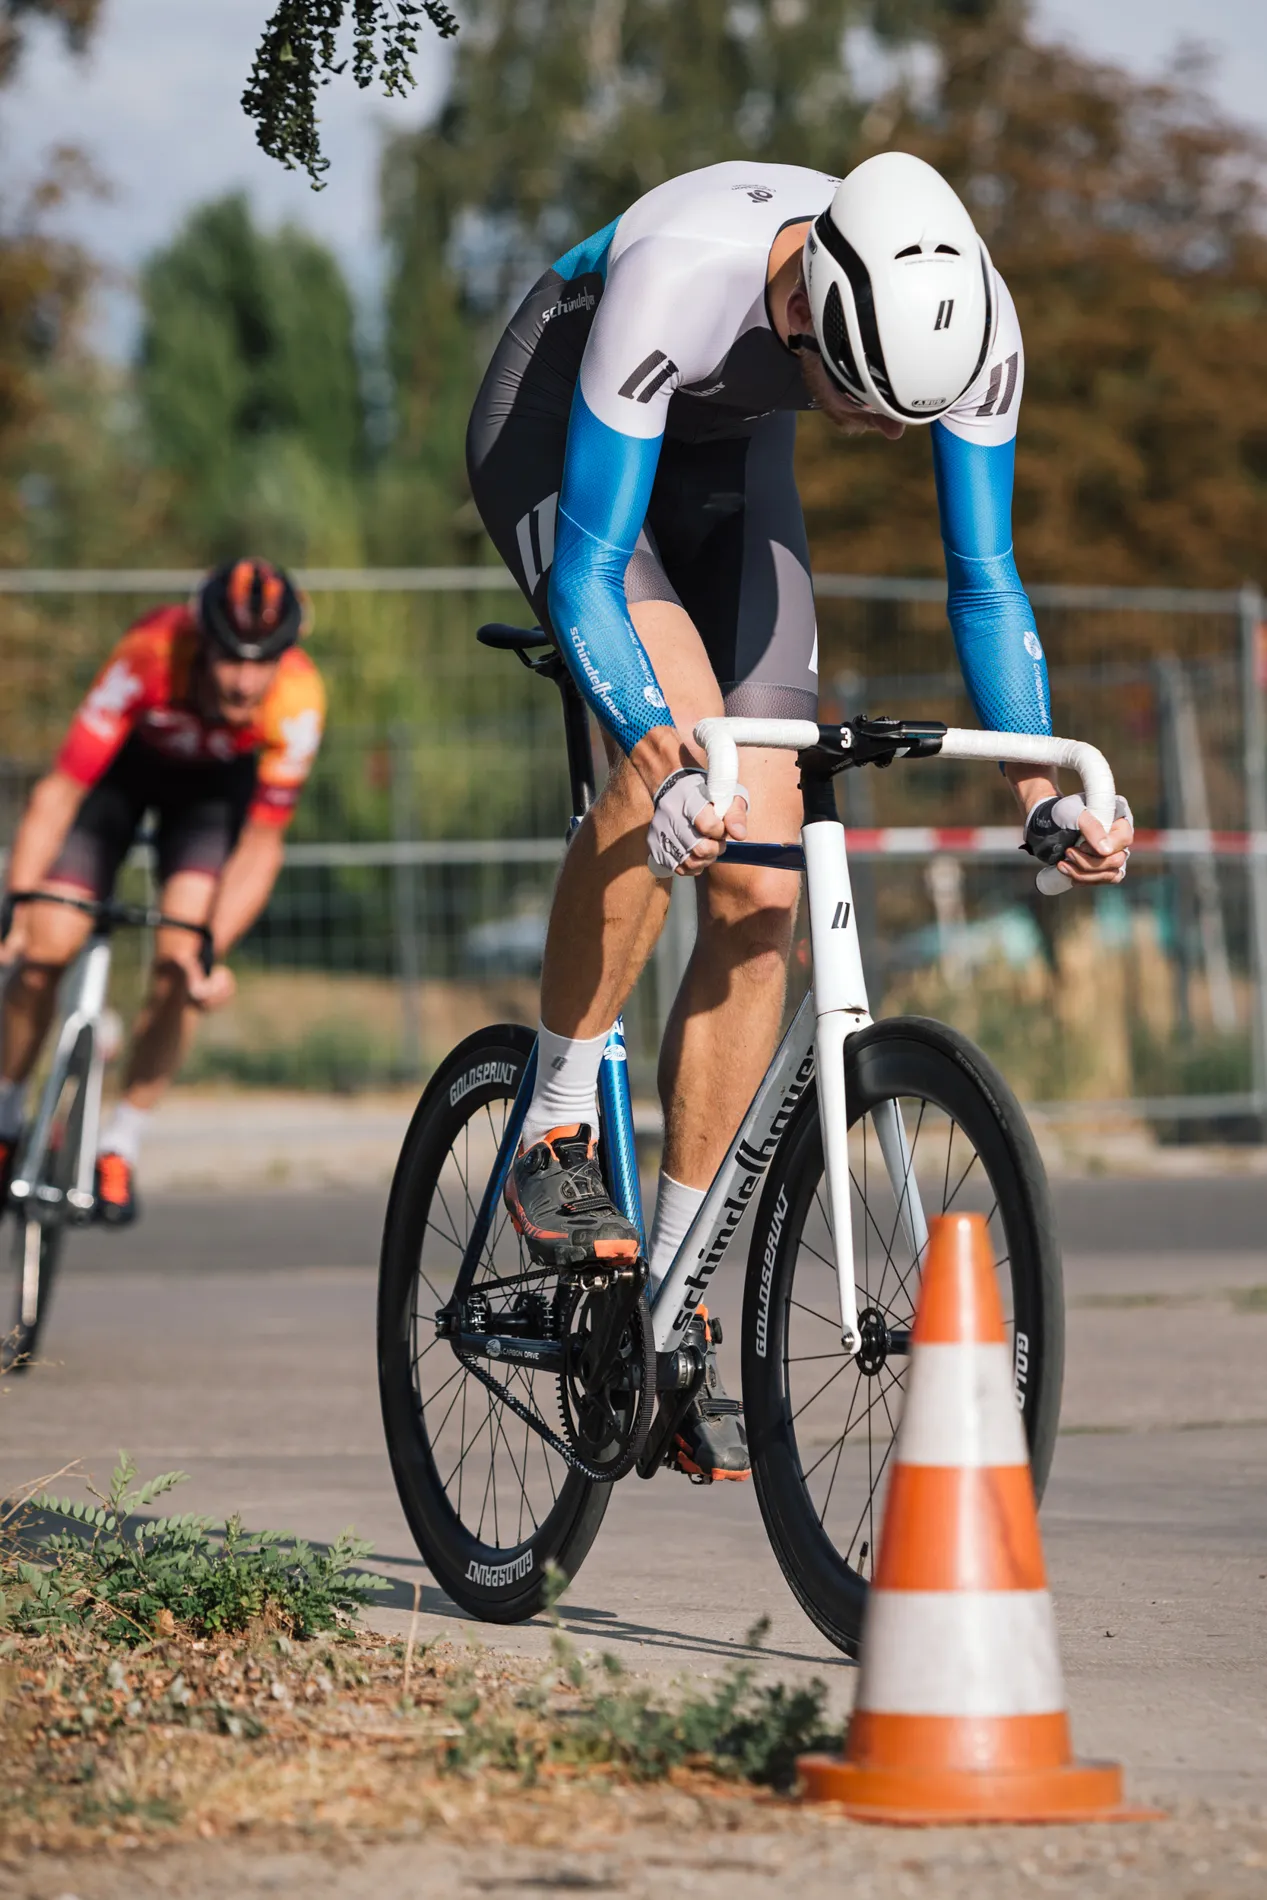 The SBSB Crit Race organized by Standert Bicycles and Stone Brew Berlin